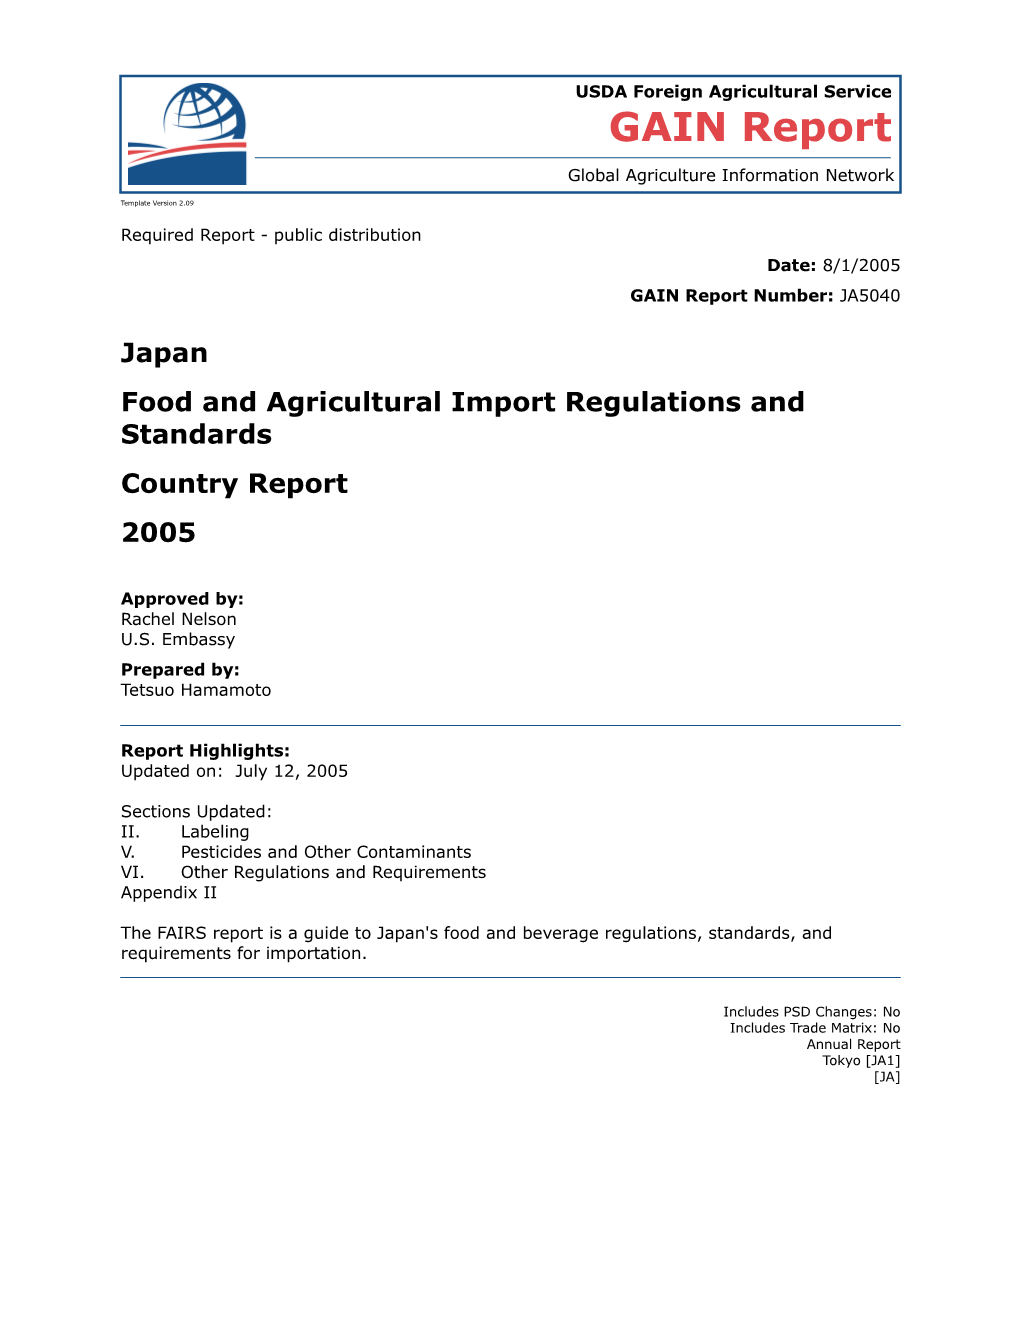 Food and Agricultural Import Regulations and Standards s19